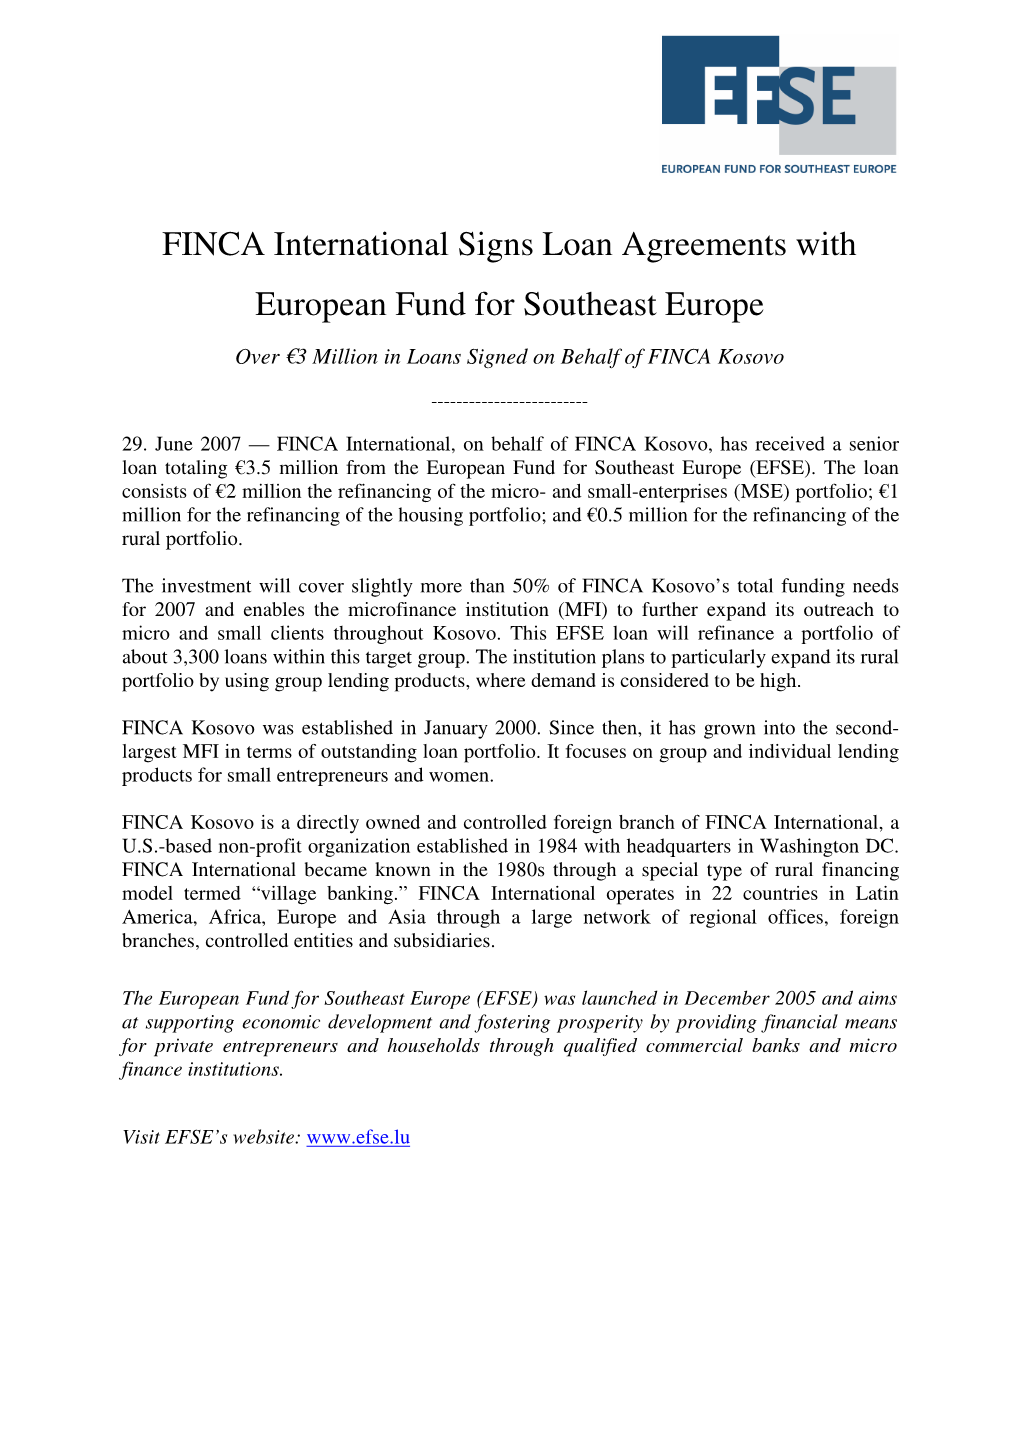 FINCA International Signs Loan Agreements with European Fund for Southeast Europe